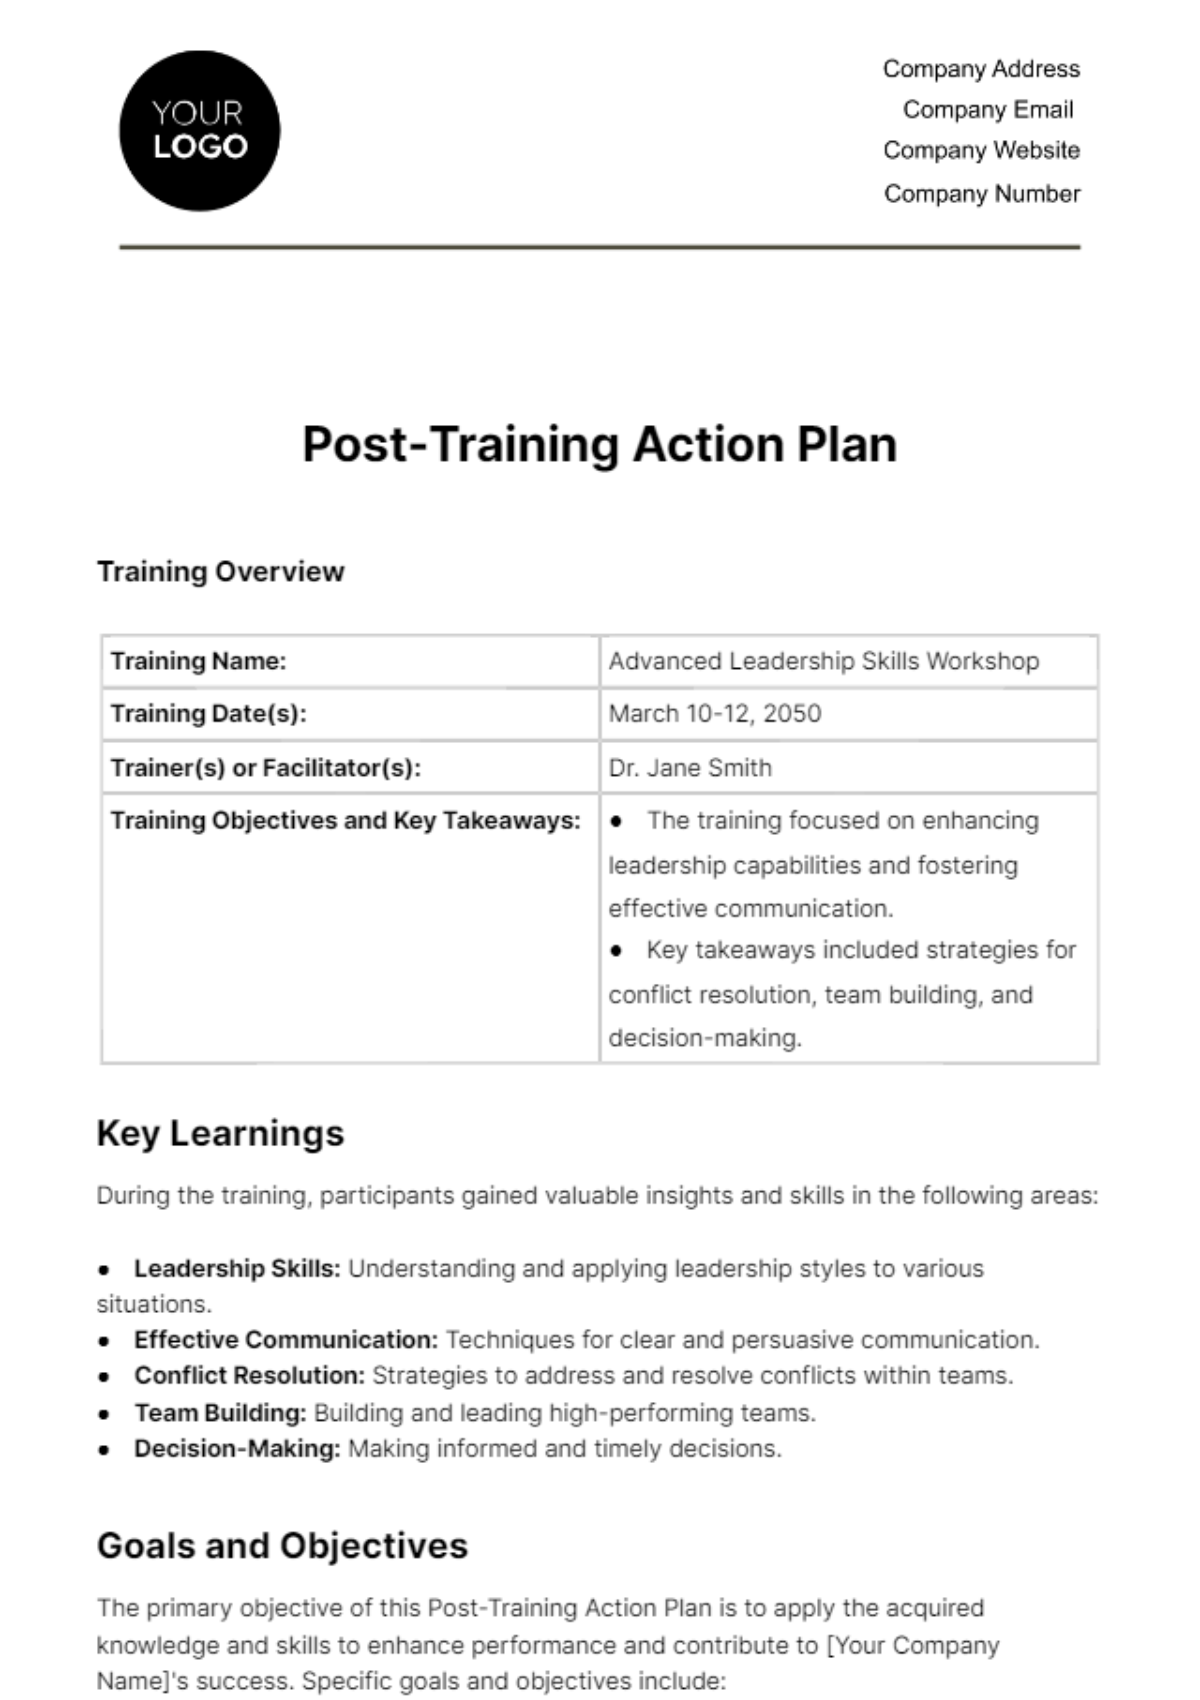 Free Post-Training Action Plan HR Template